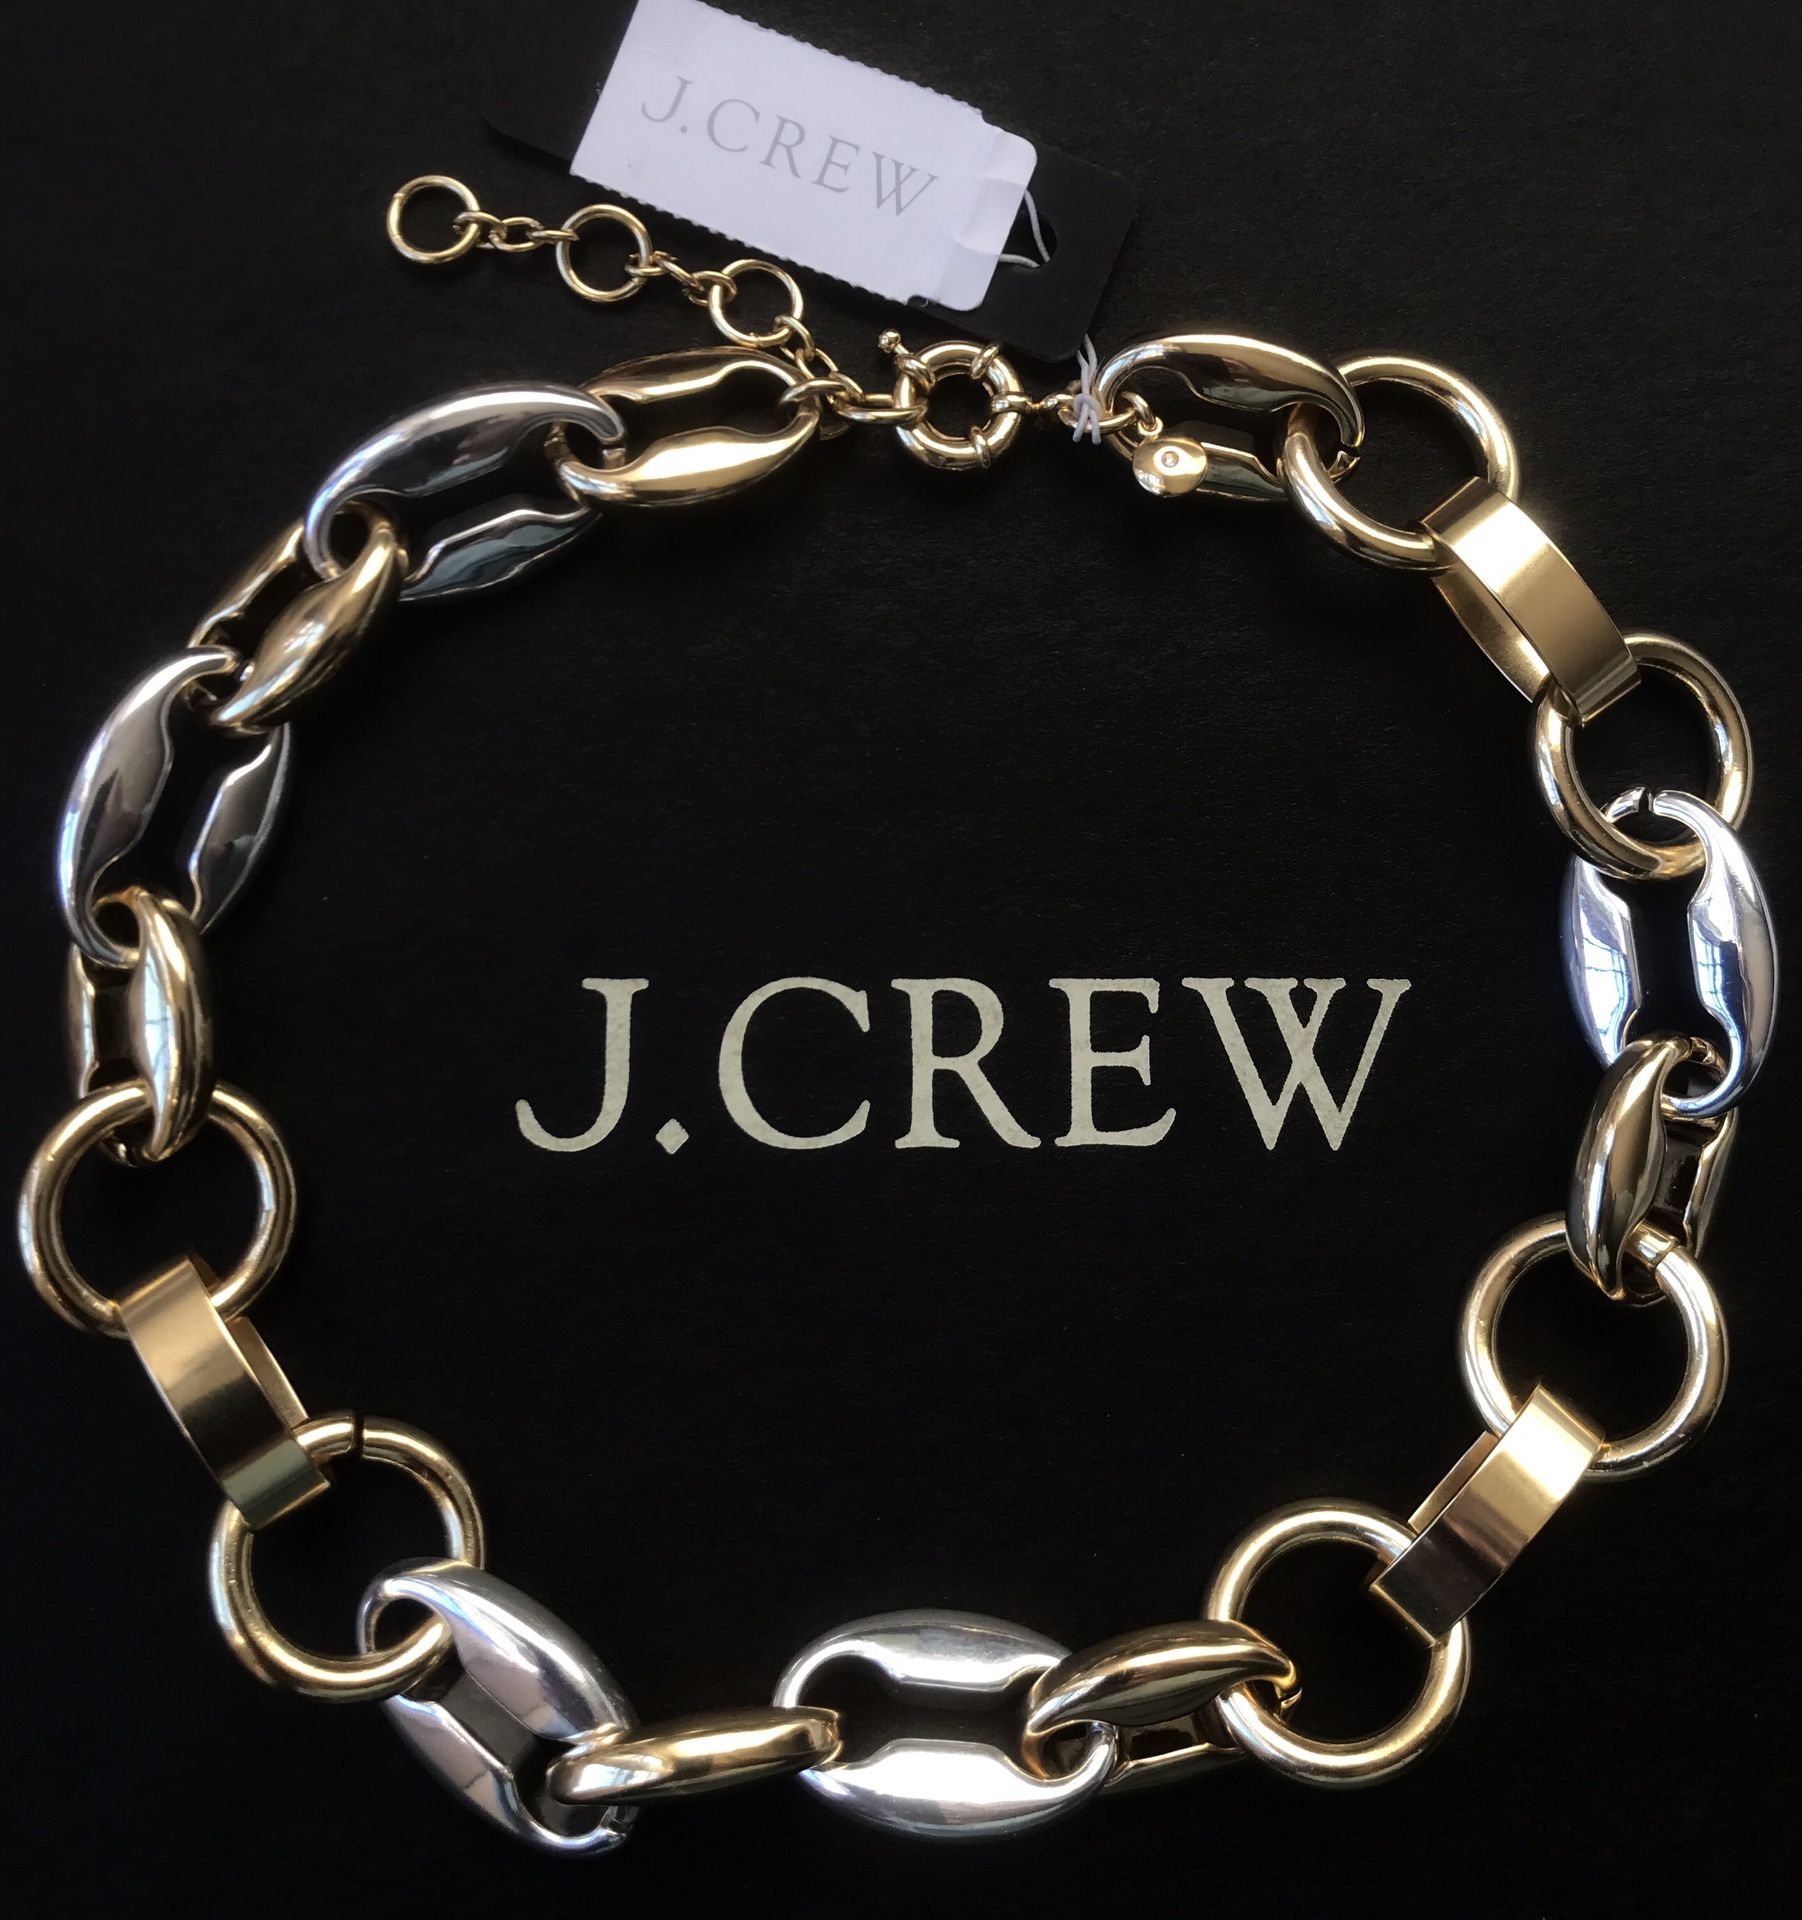 (NEW) (1 AVAILABLE) WOMEN’S J.CREW MIXED METAL CHAINLINK NECKLACE - SIZE: OS (ONE SIZE) 